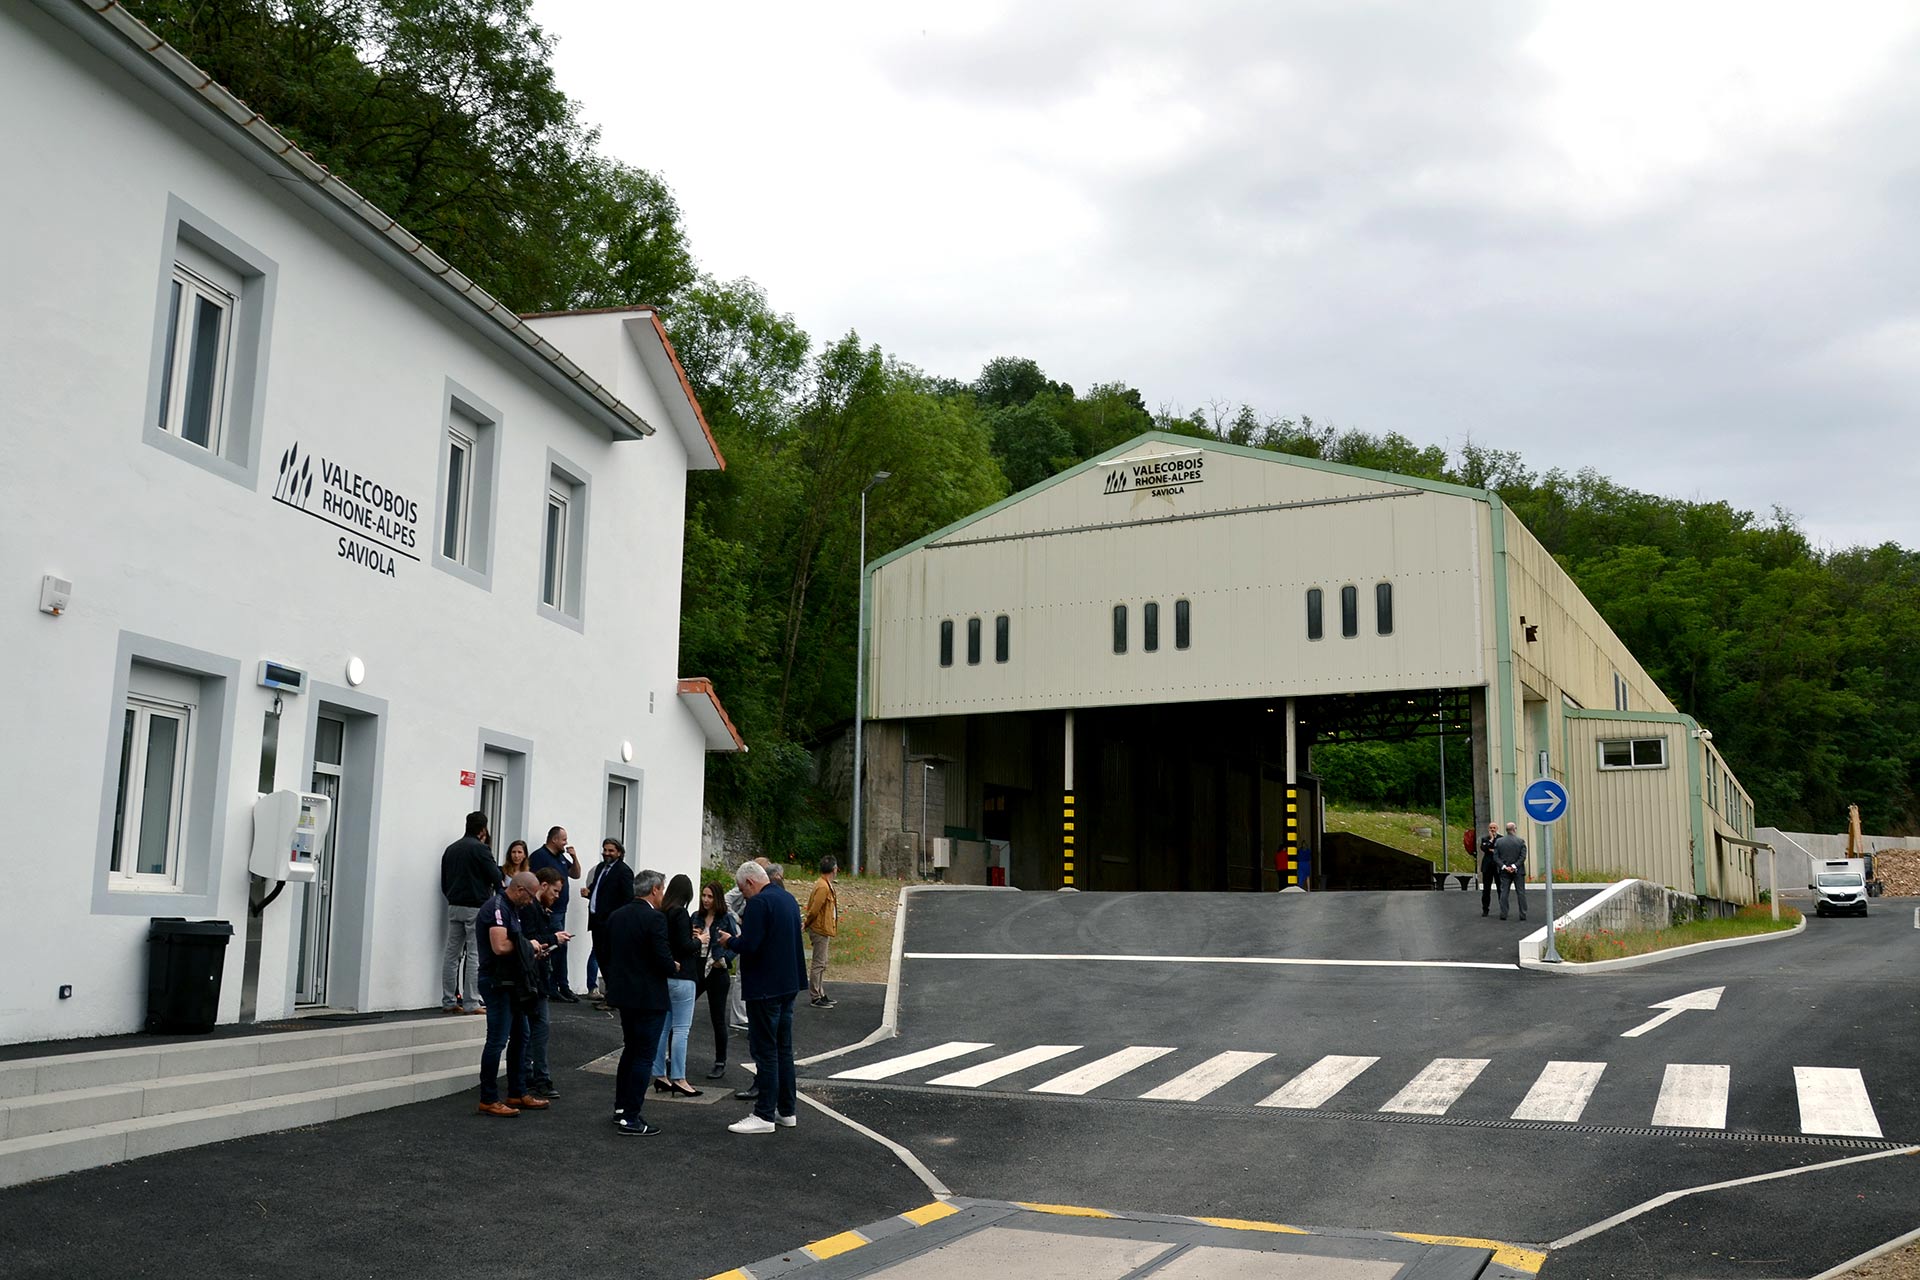 Wood waste recycling building and facility of Valecobois Rhône-Alpes (Saviola Group), in Givors